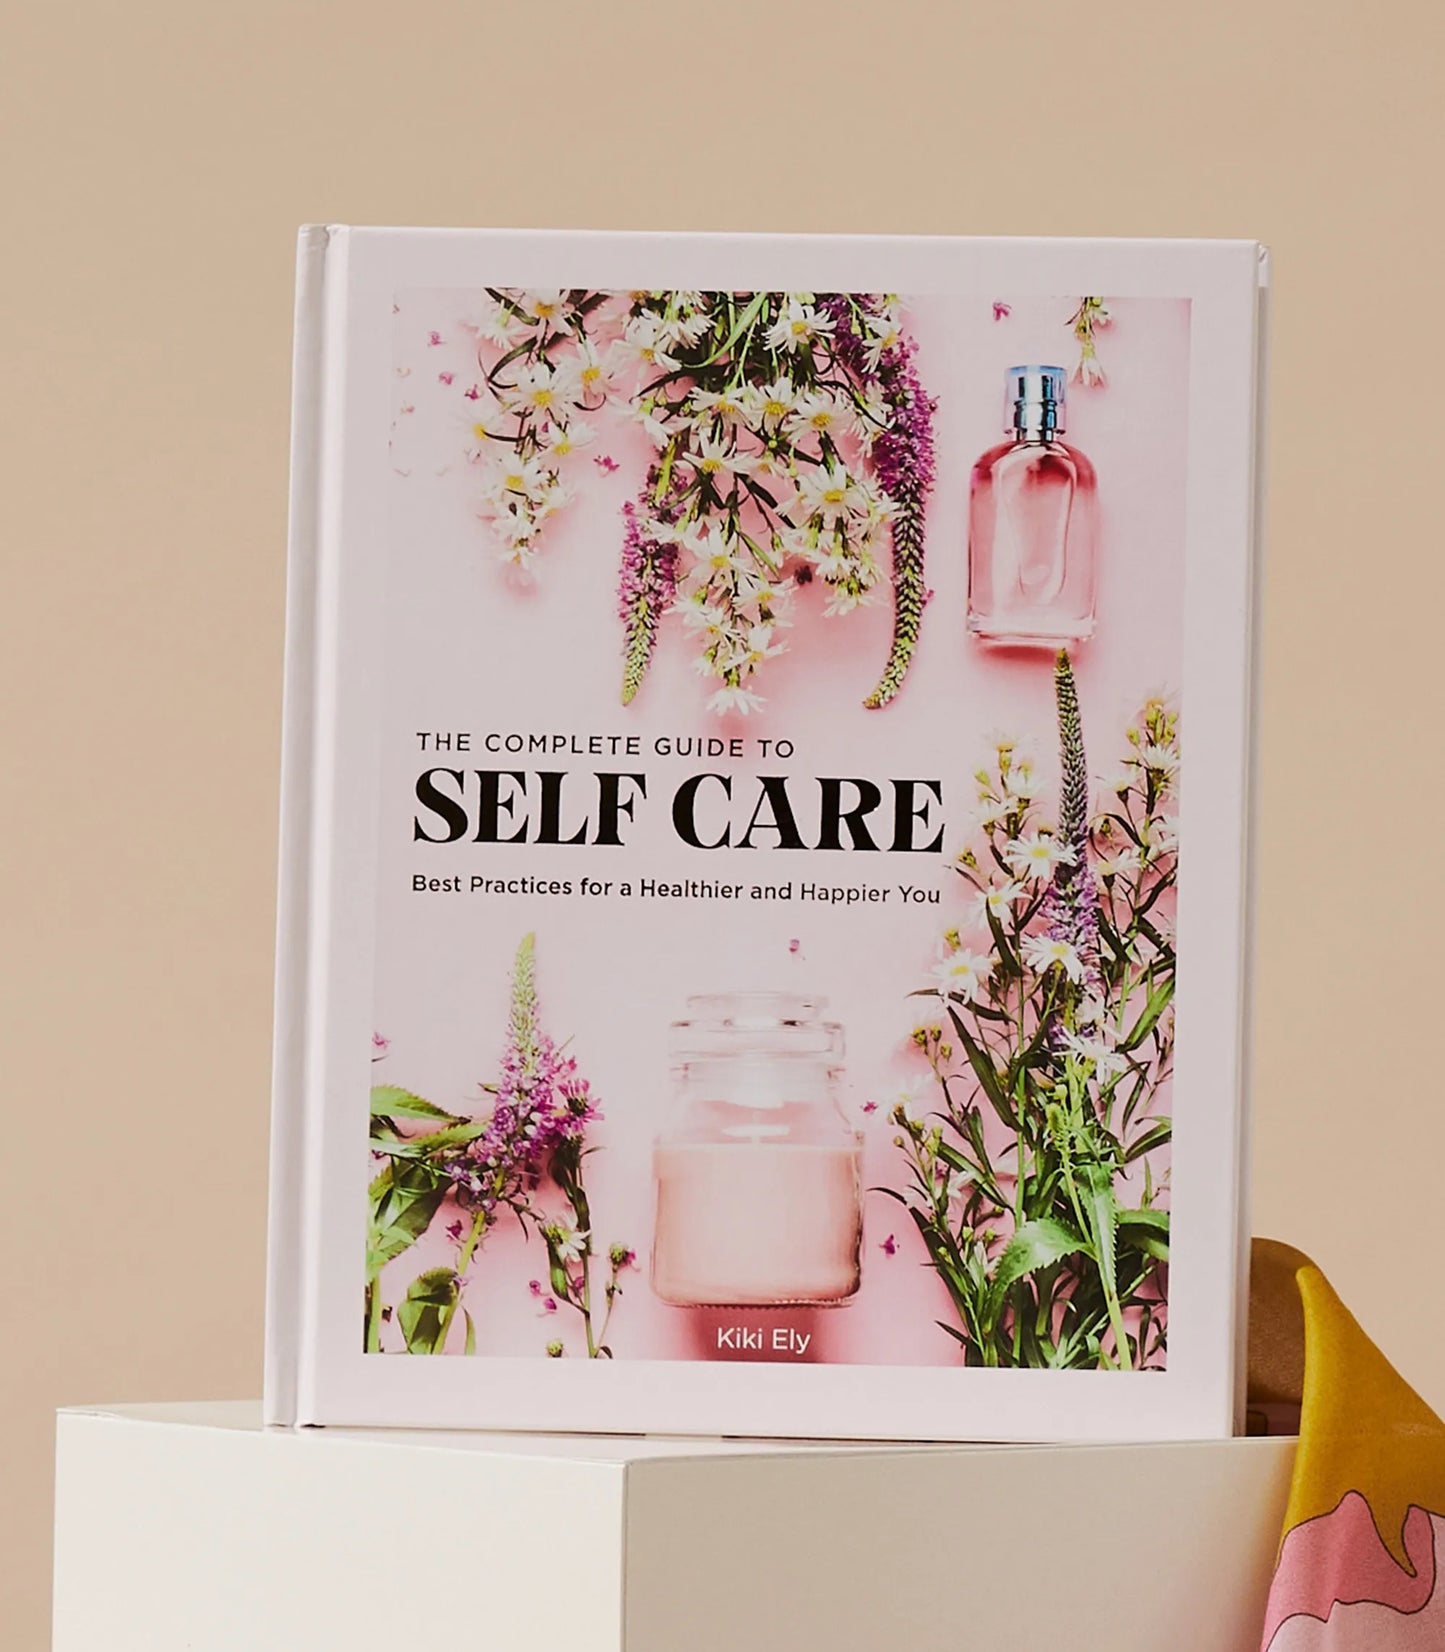 COMPLETE GUIDE TO SELF-CARE